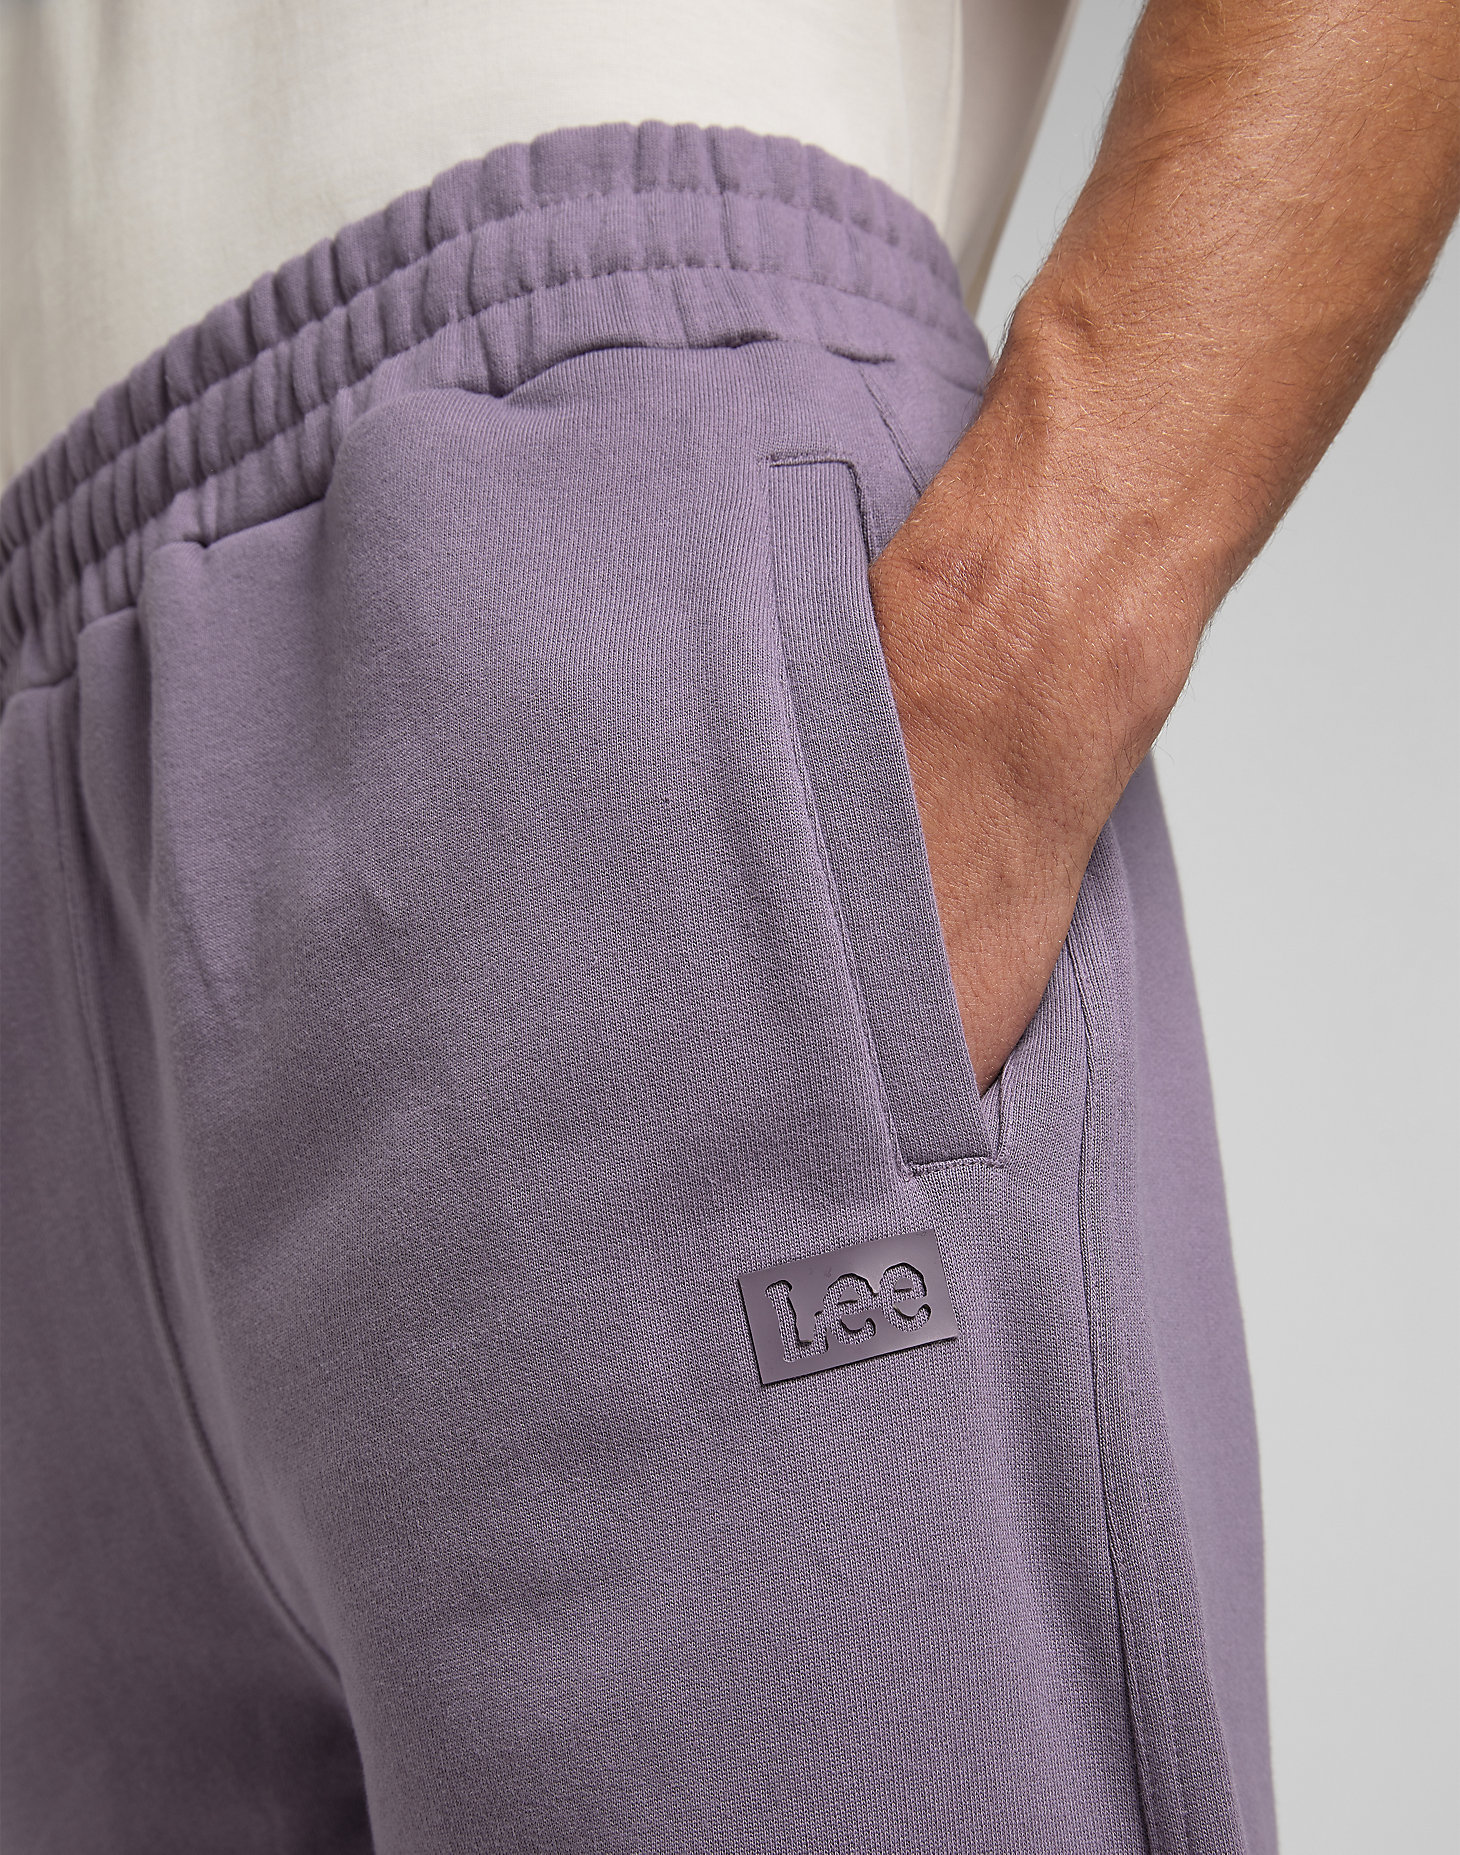 Sweat Pant in Washed Purple alternative view 7